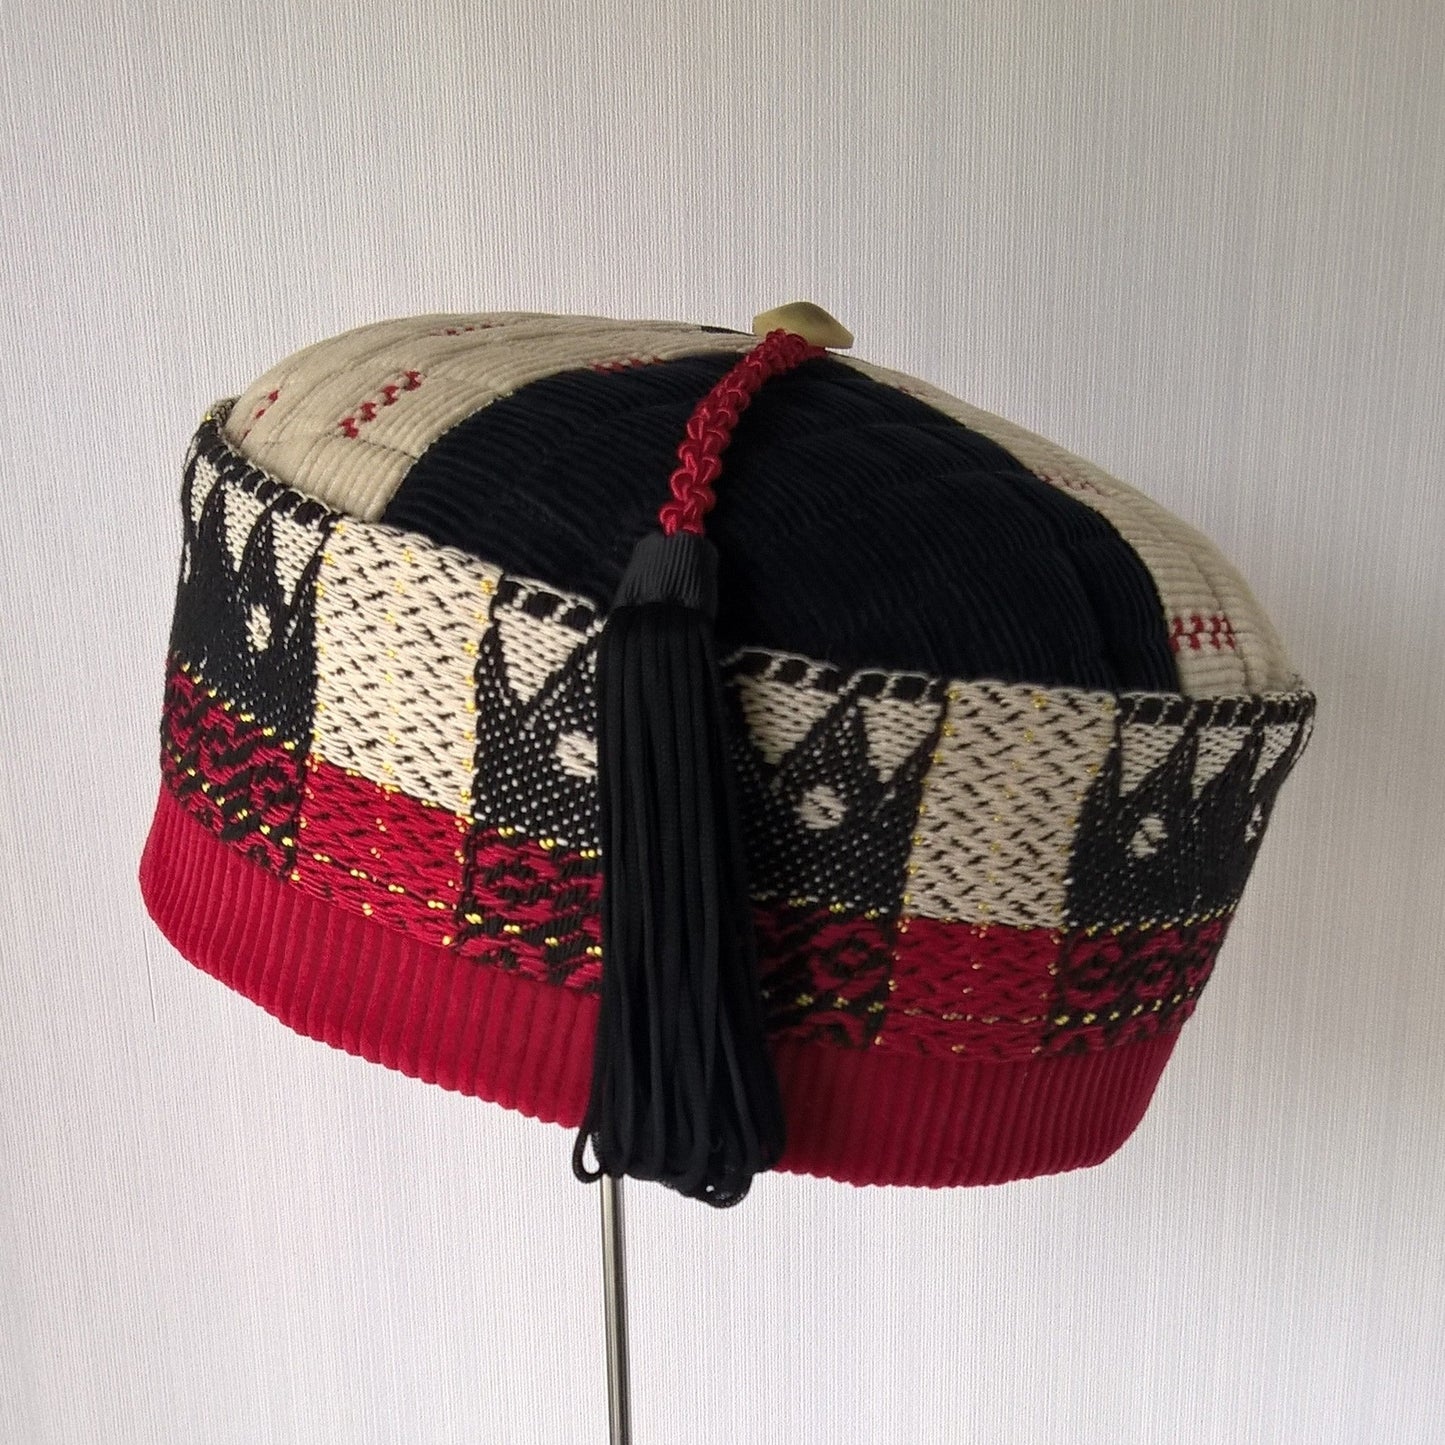 Corduroy smoking cap with vintage ethnic weave fabric in black red and cream